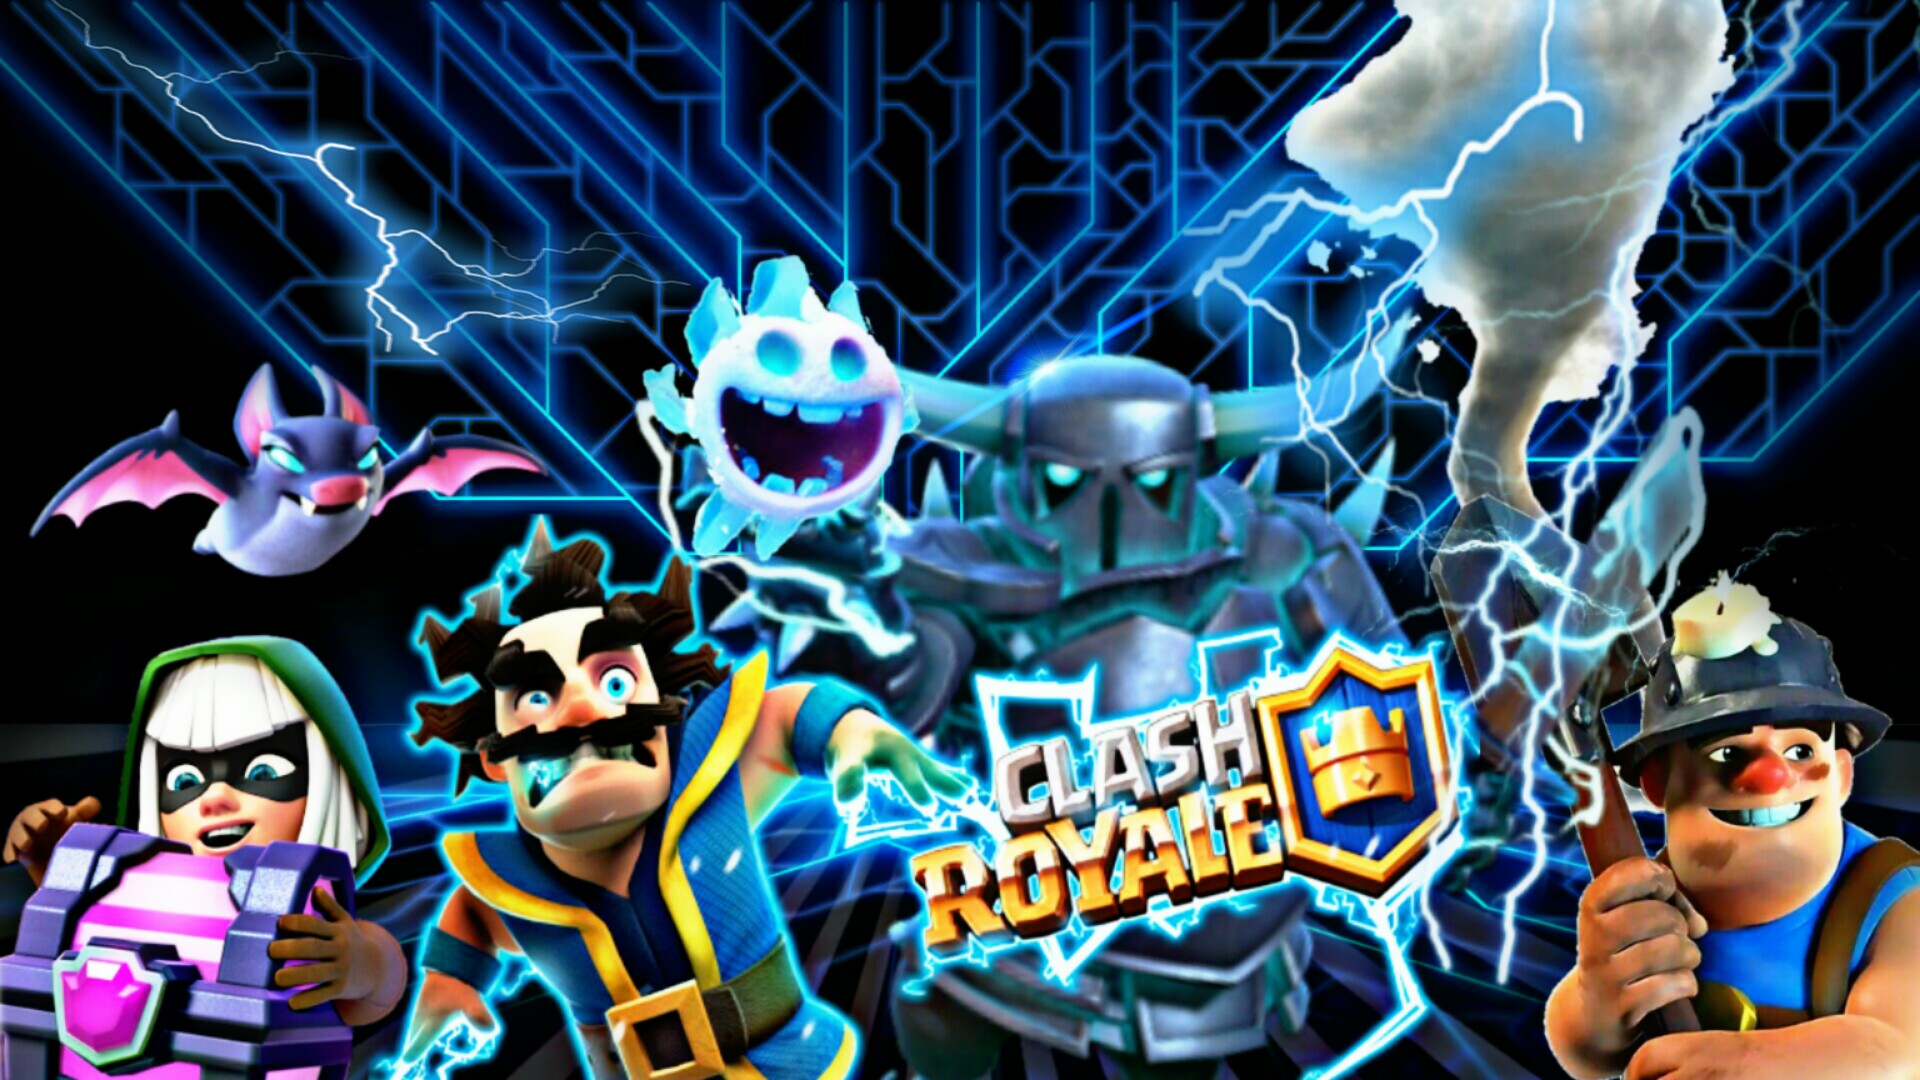 Clash royale wallpaper by carloscep on